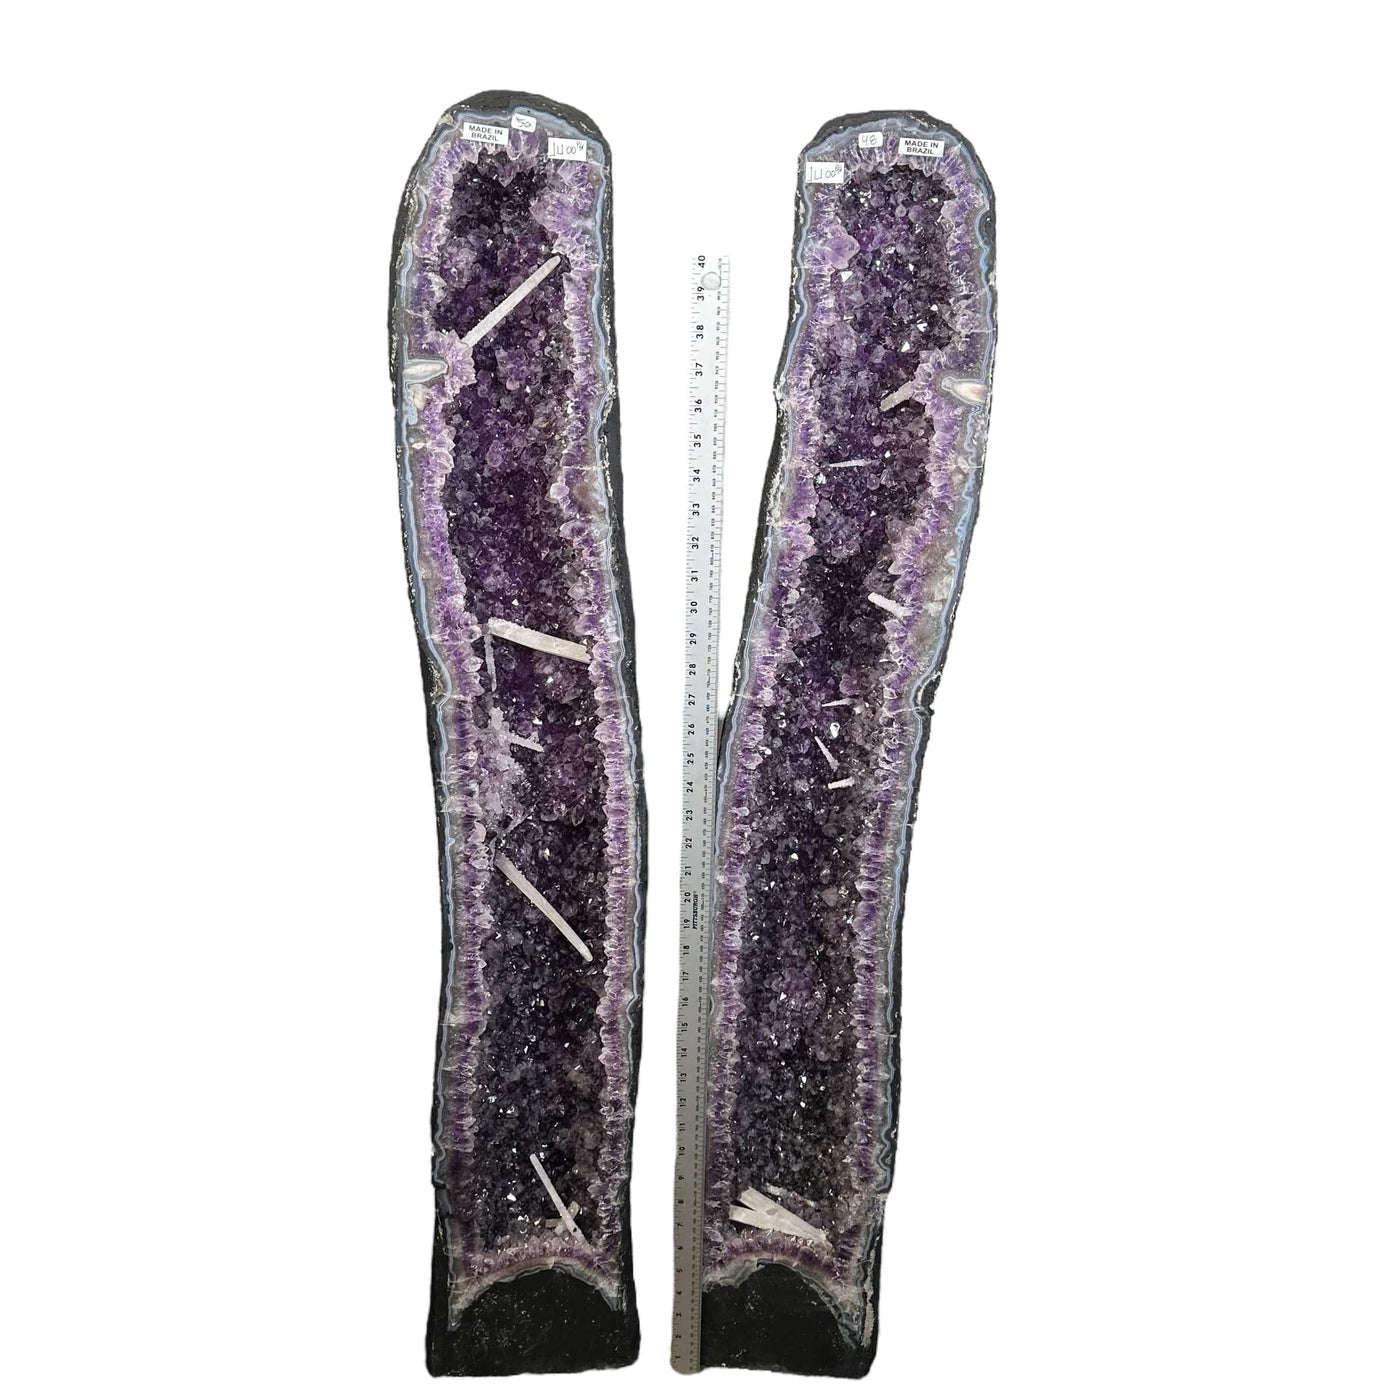 Amethyst Cathedrals with sugar Calcite druzy - Set of 2 next to a ruler for size reference